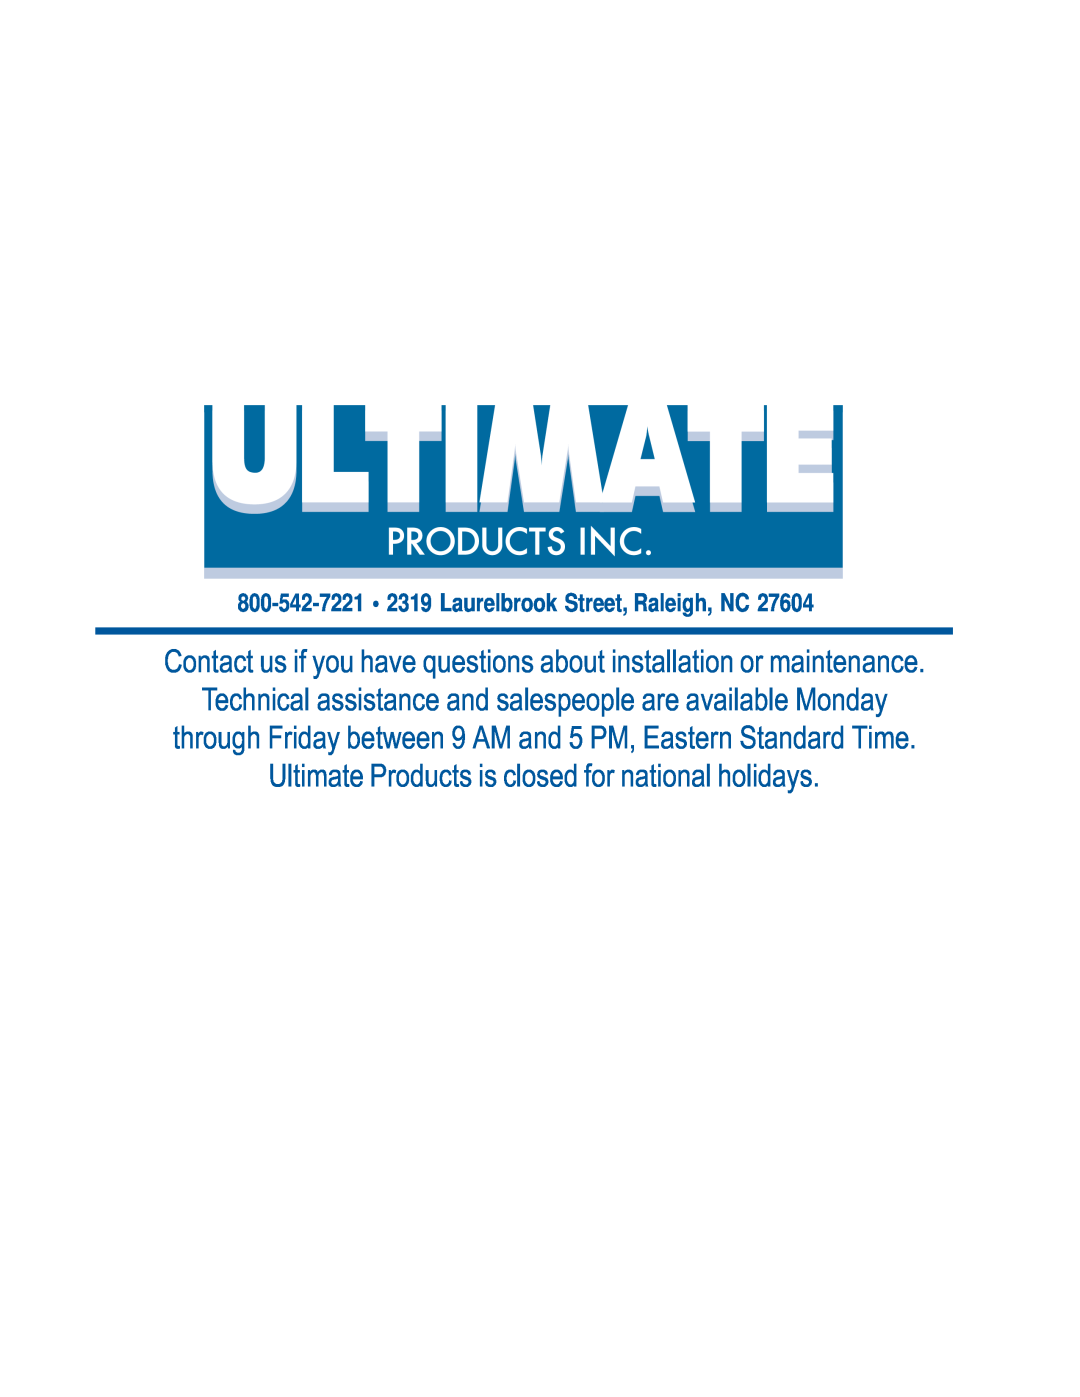 Ultimate Products UP-206 manual Ultimate Products is closed for national holidays 